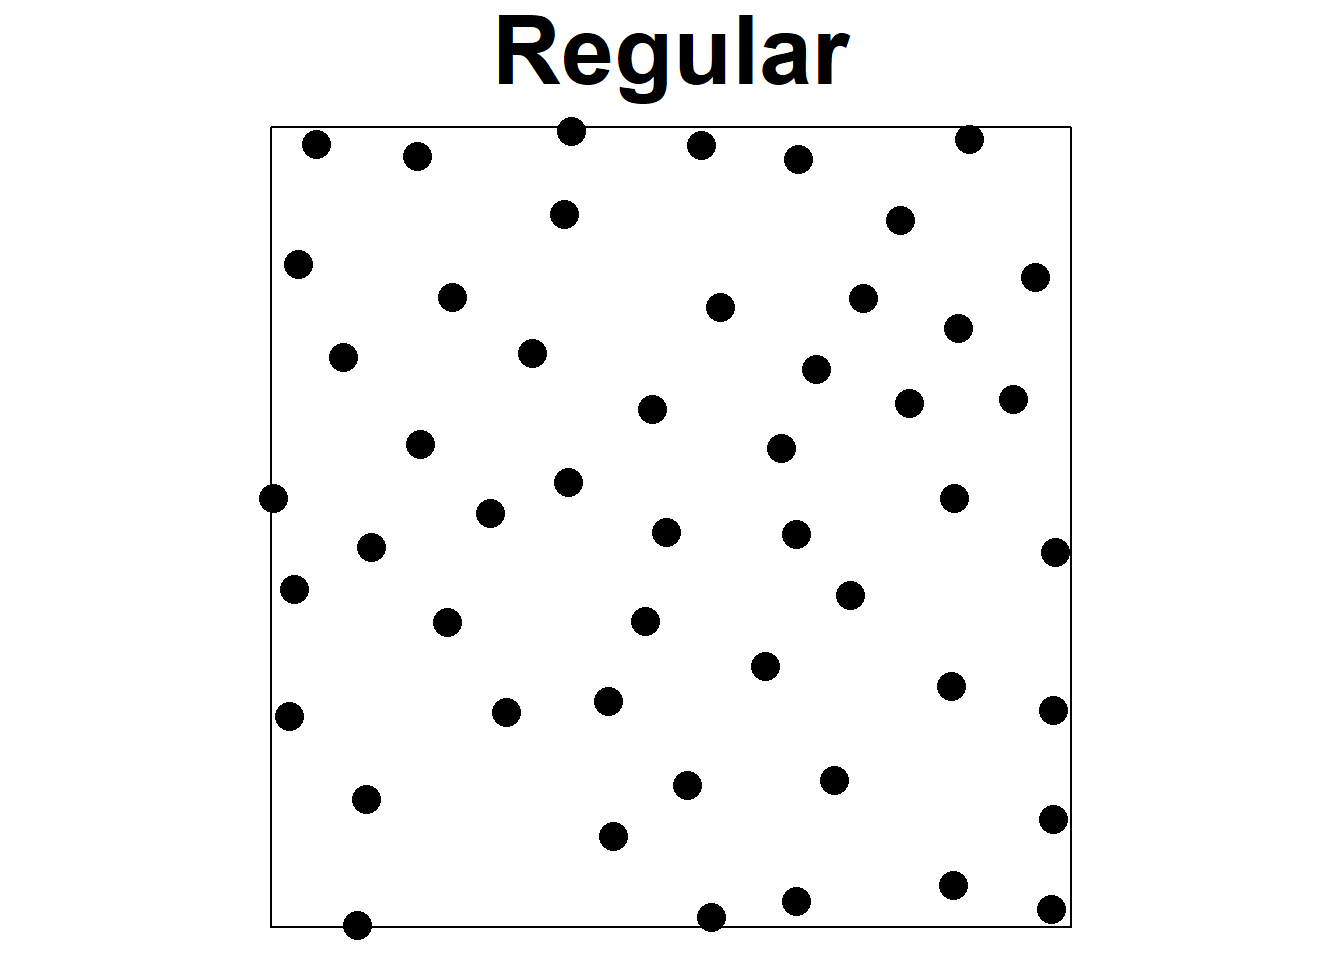 Examples of regular, random, and aggregated point patterns.